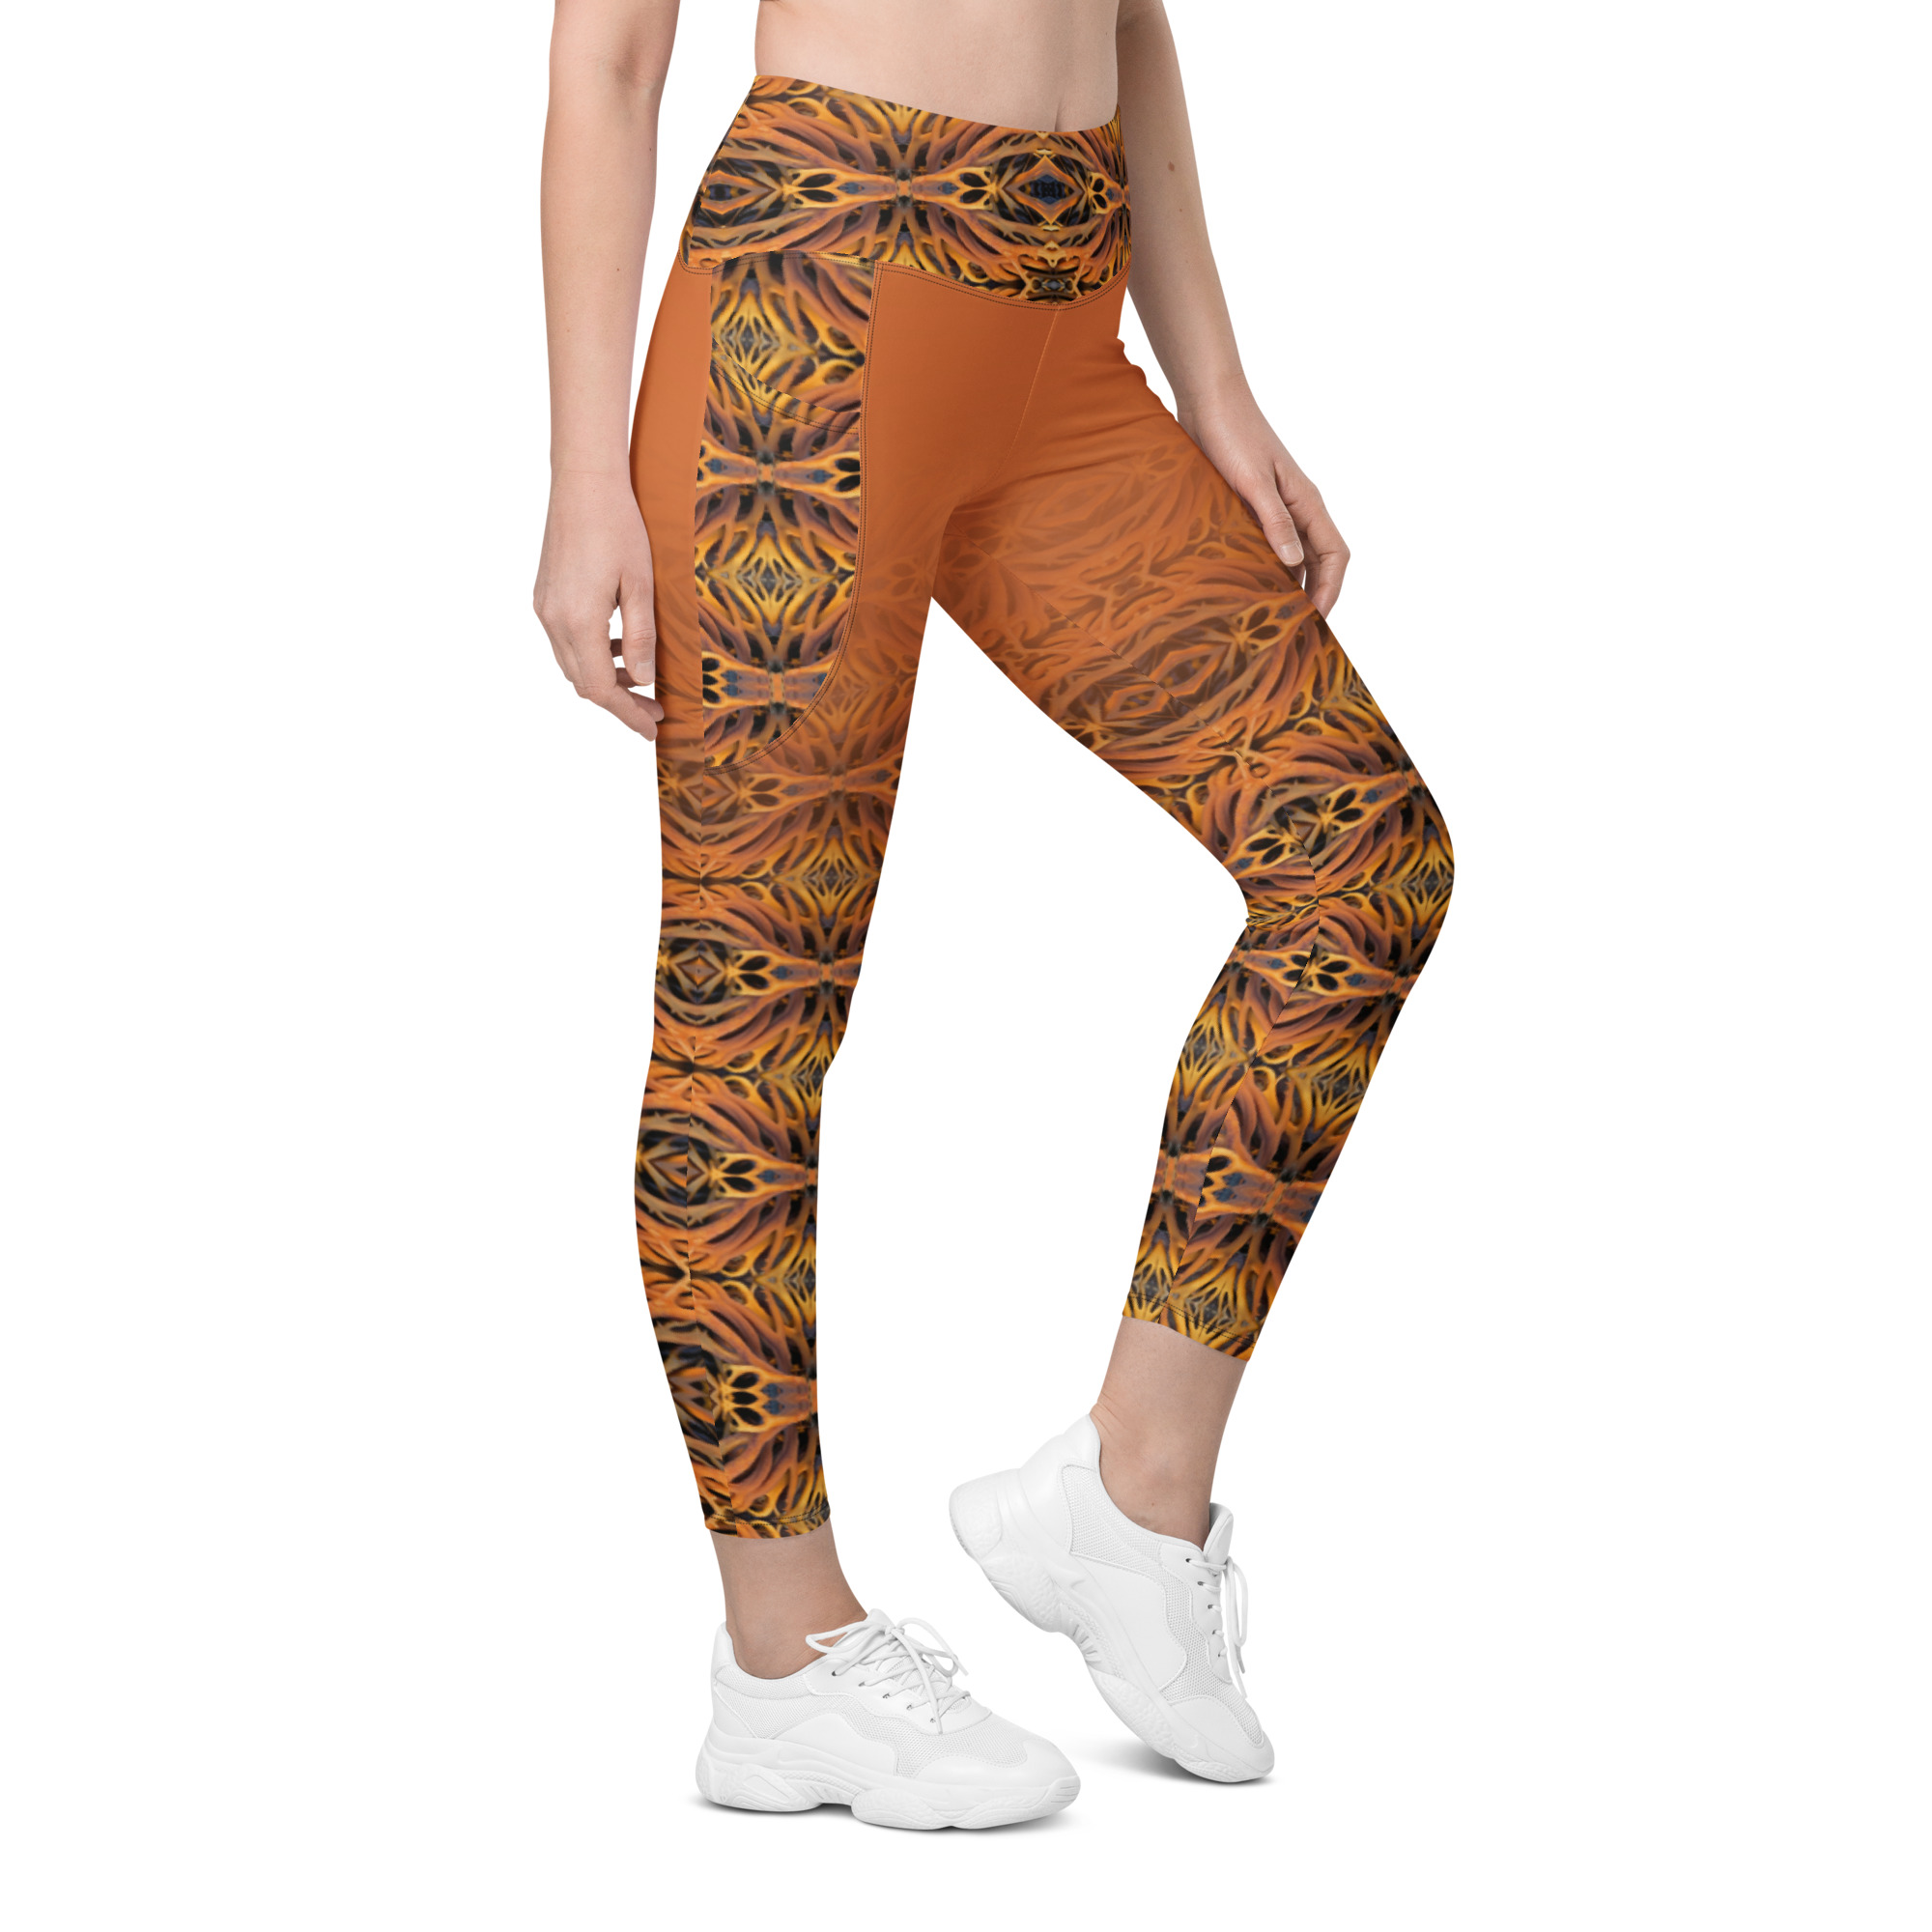 Third Eye Embrace Leggings with pockets - Amy Lundstrom Designs